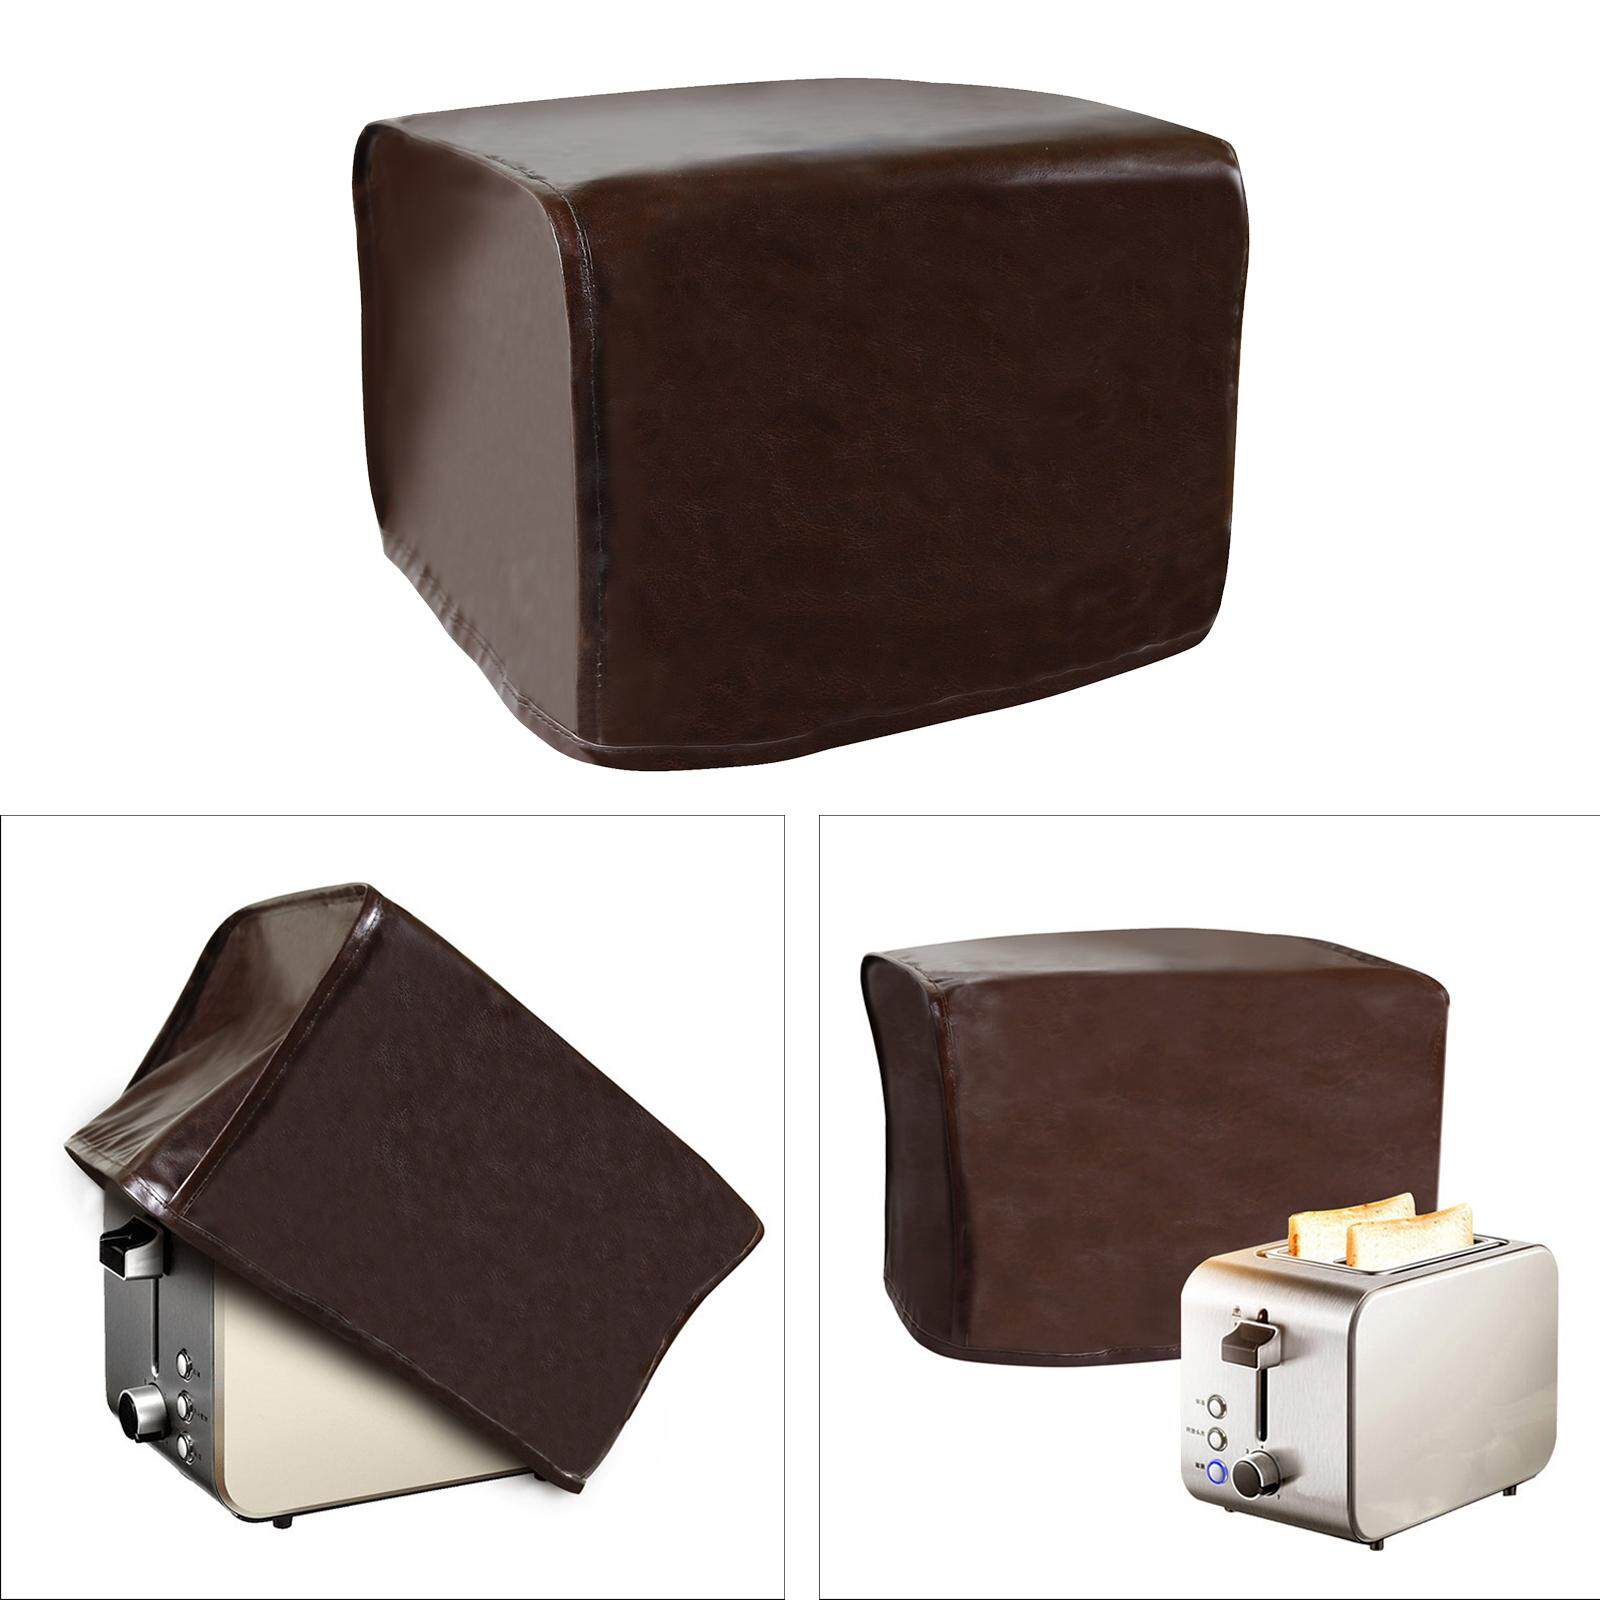 Toaster Cover Fitments Bread Machine Cover for Kitchen Household